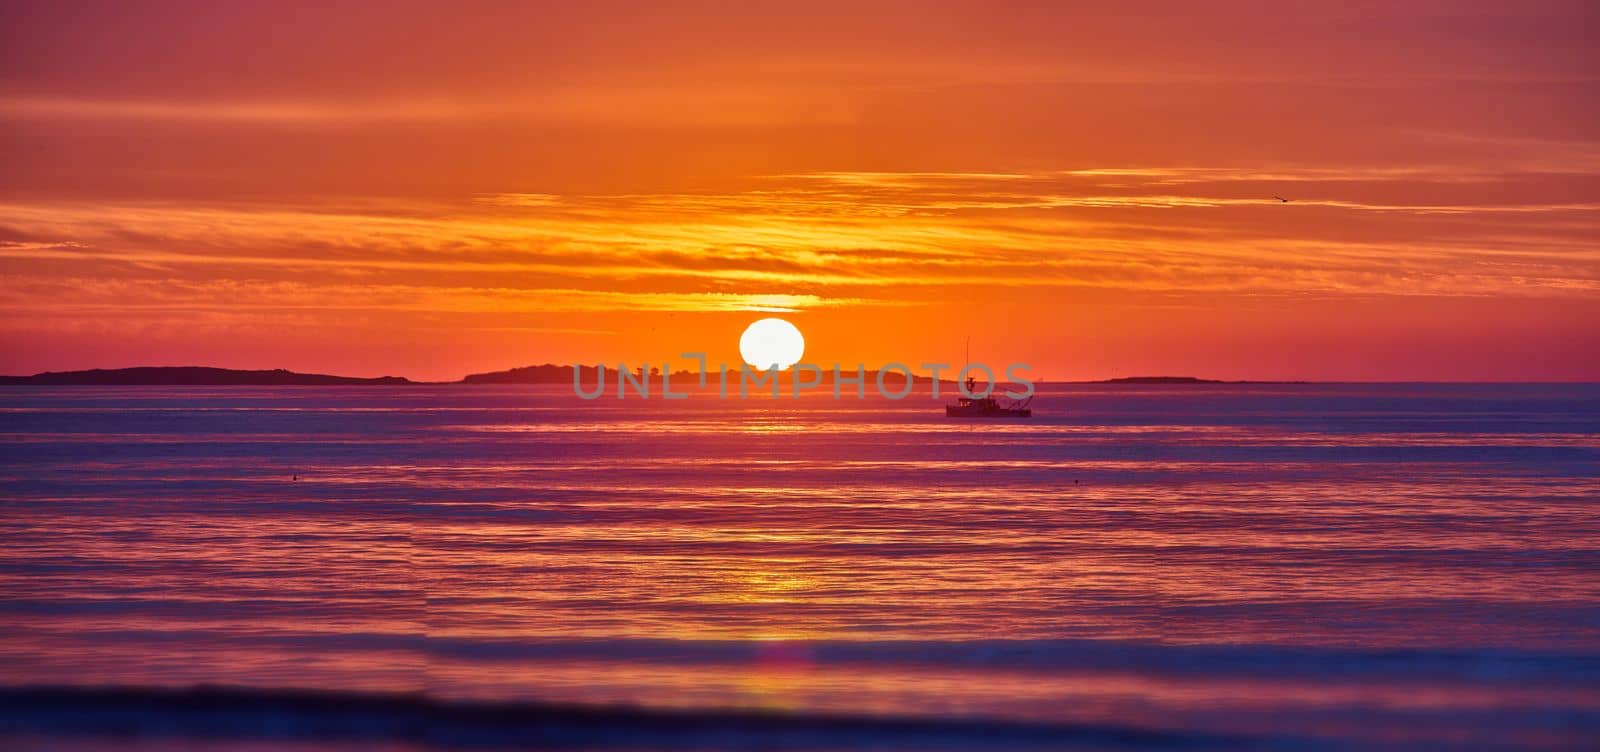 Image of Golden light over east coast ocean with sunrise and detail of sun and fishing ship in distance